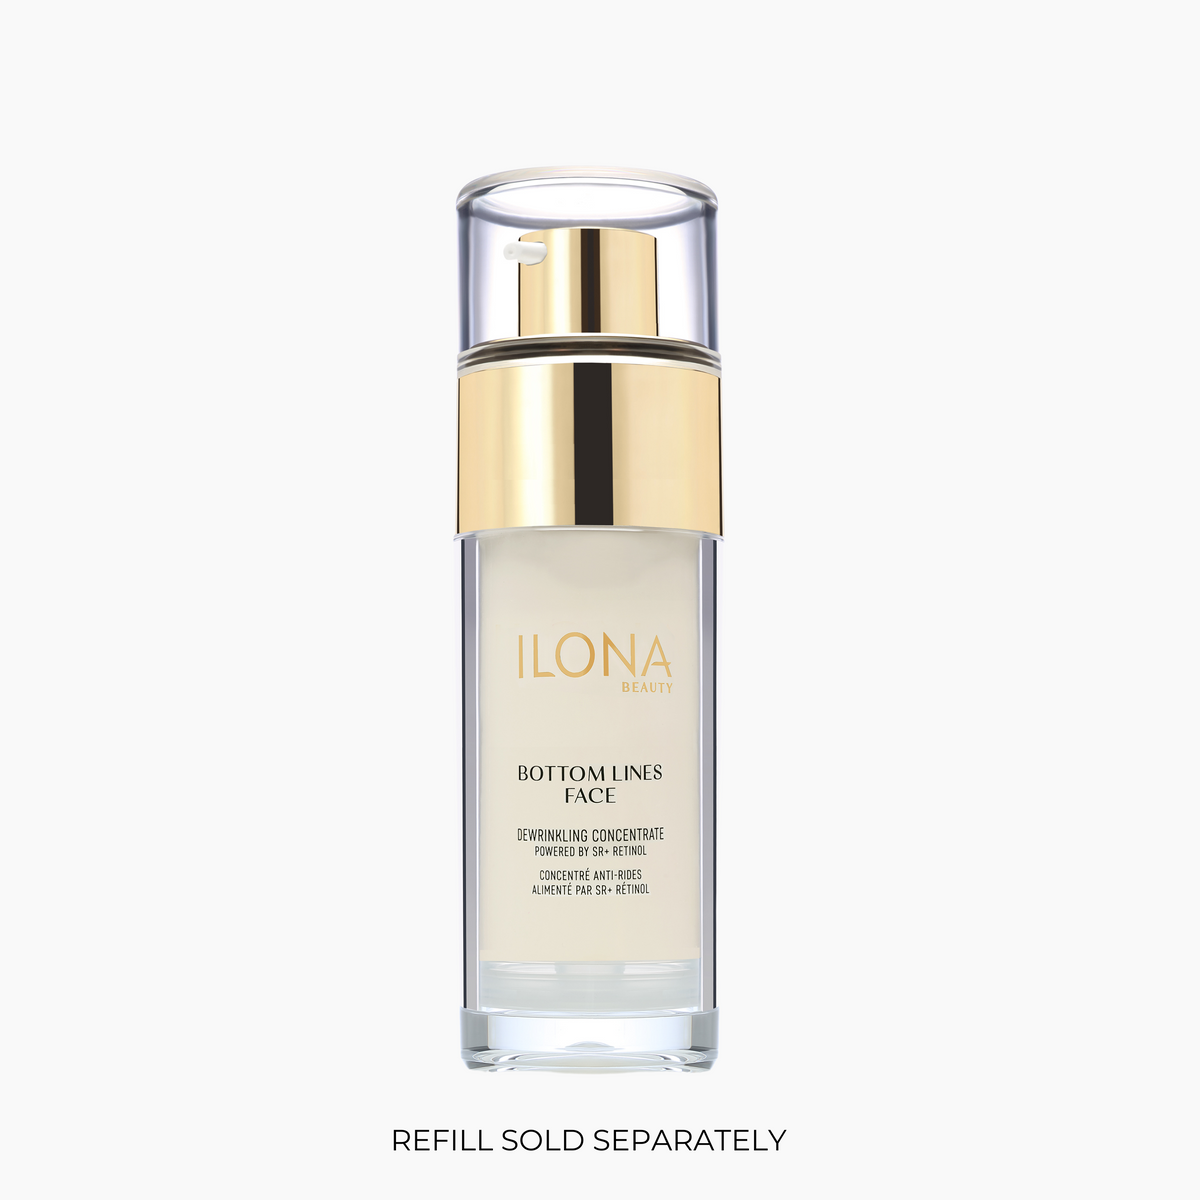 Bottom Lines Face Dewrinkling Concentrate [Powered by SR+ Retinol]